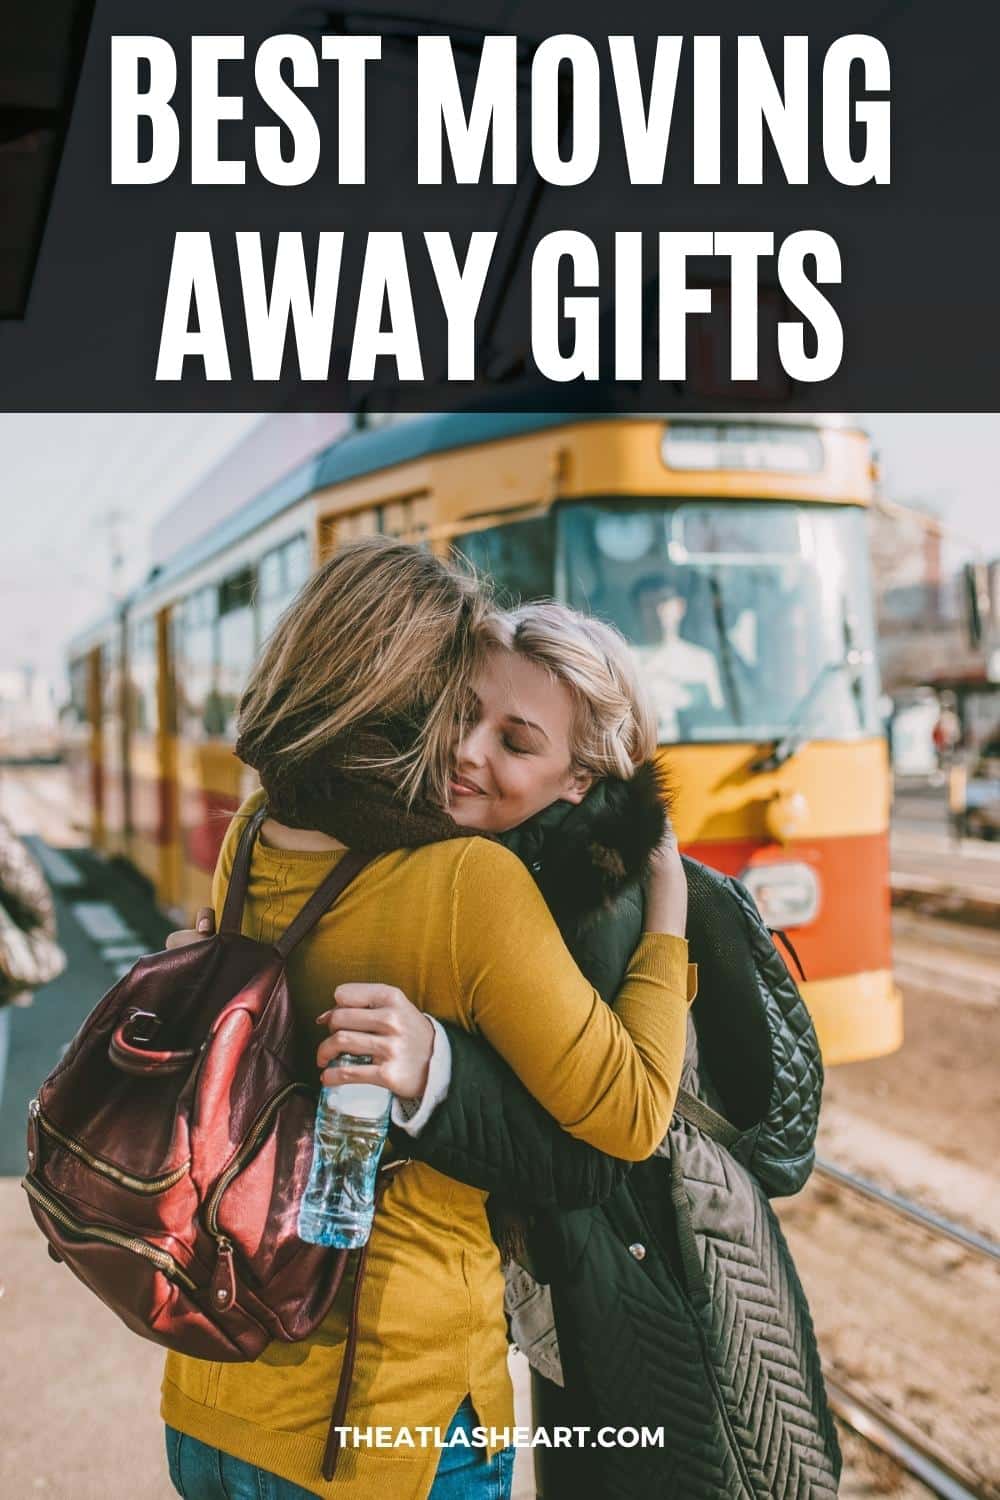 41 Best Moving Away Gifts to Show Someone How Much You\'ll Miss Them